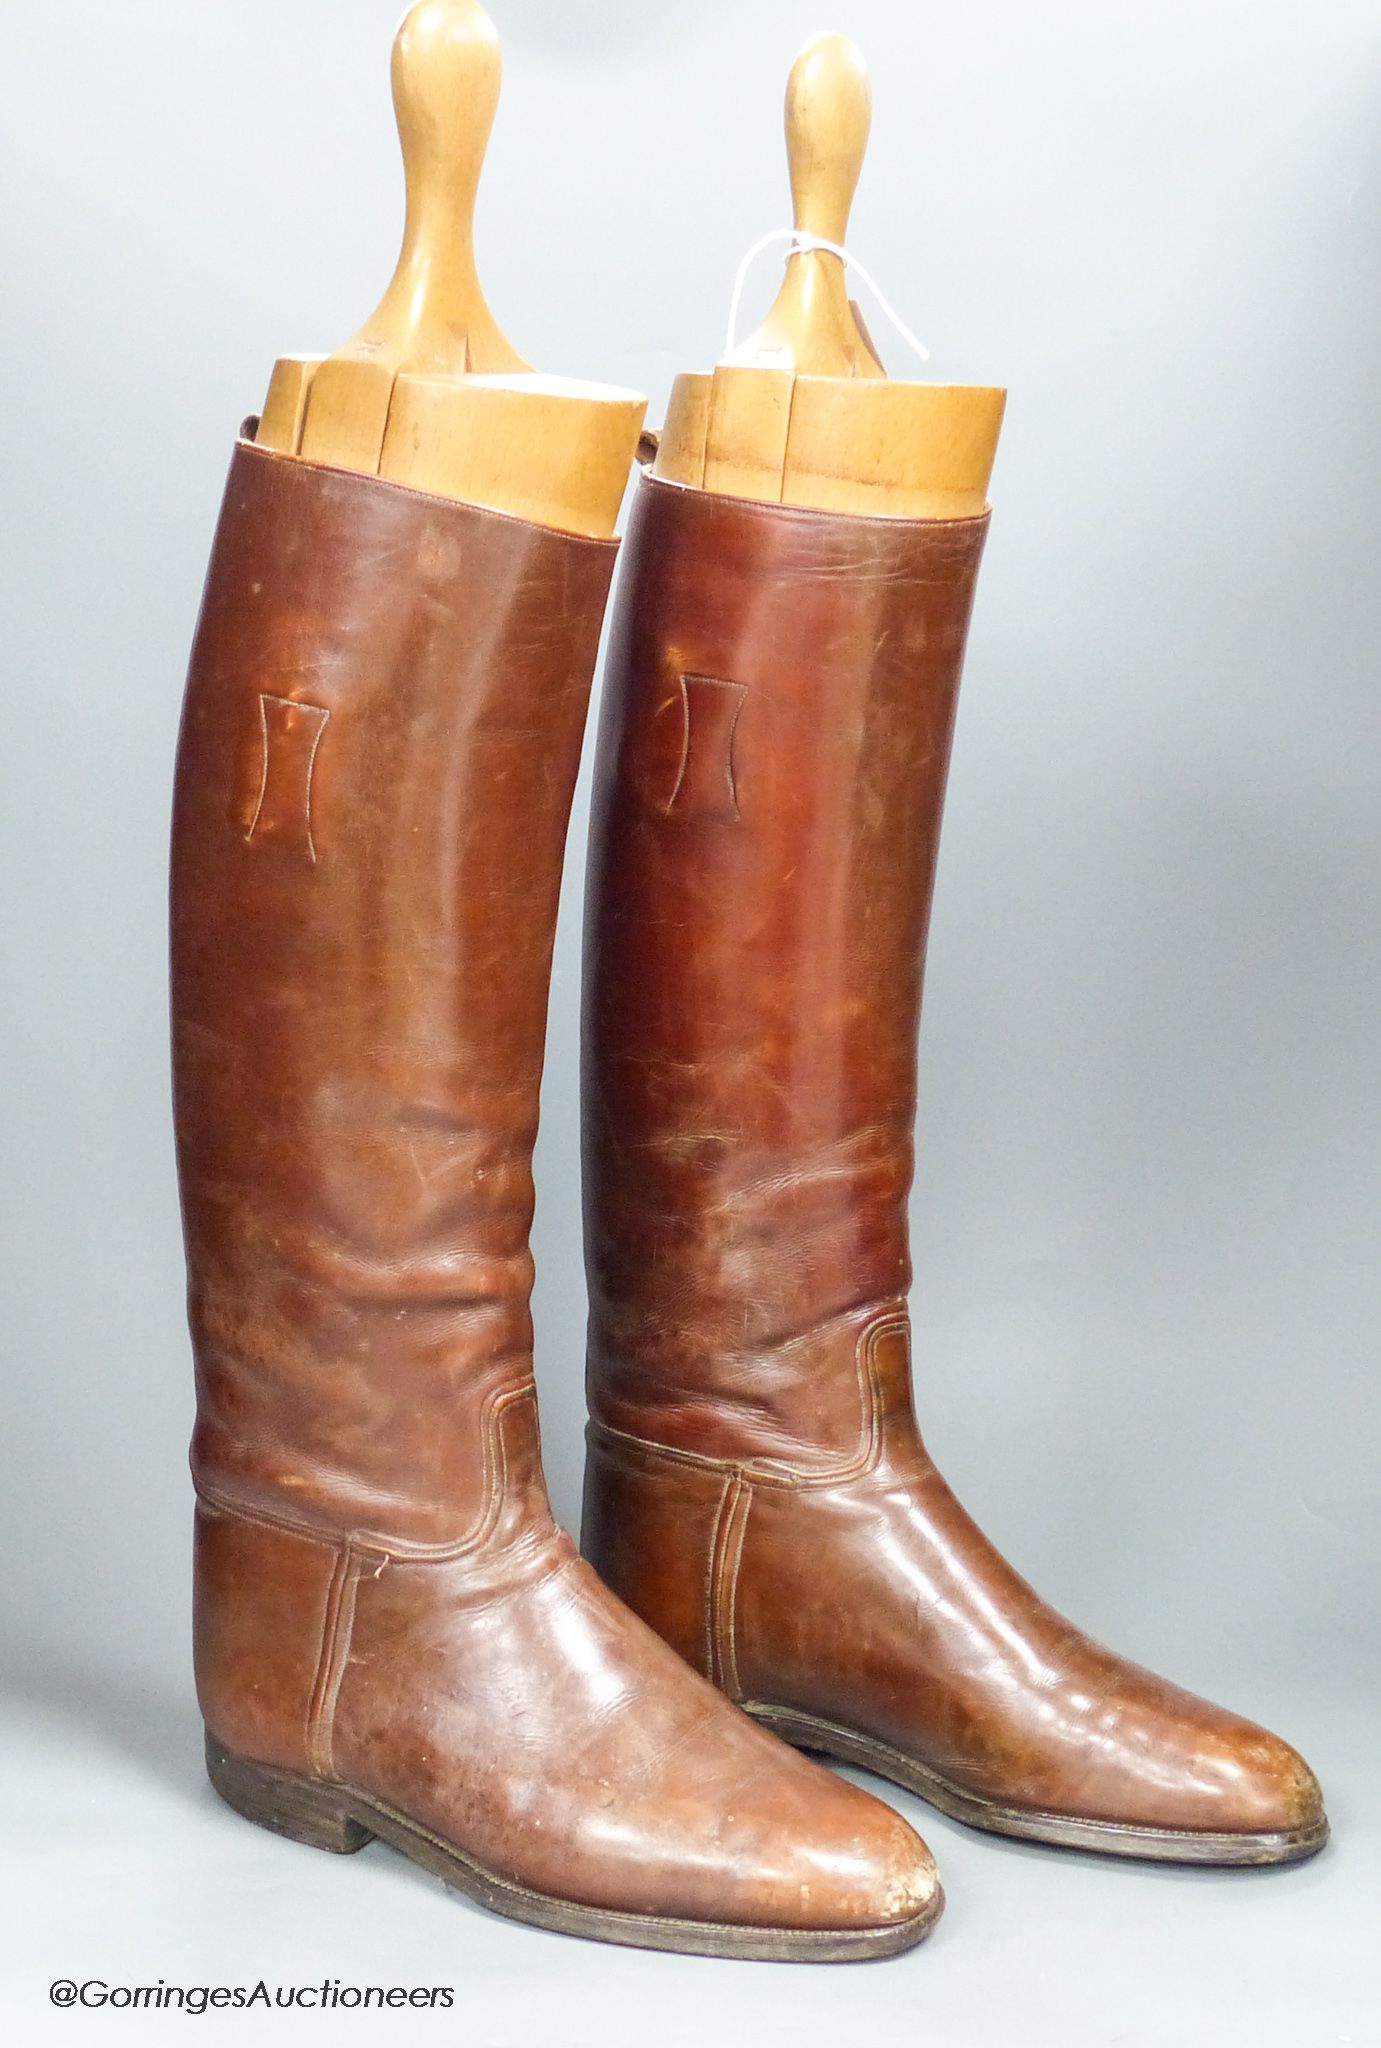 A pair of brown leather riding boots and trees